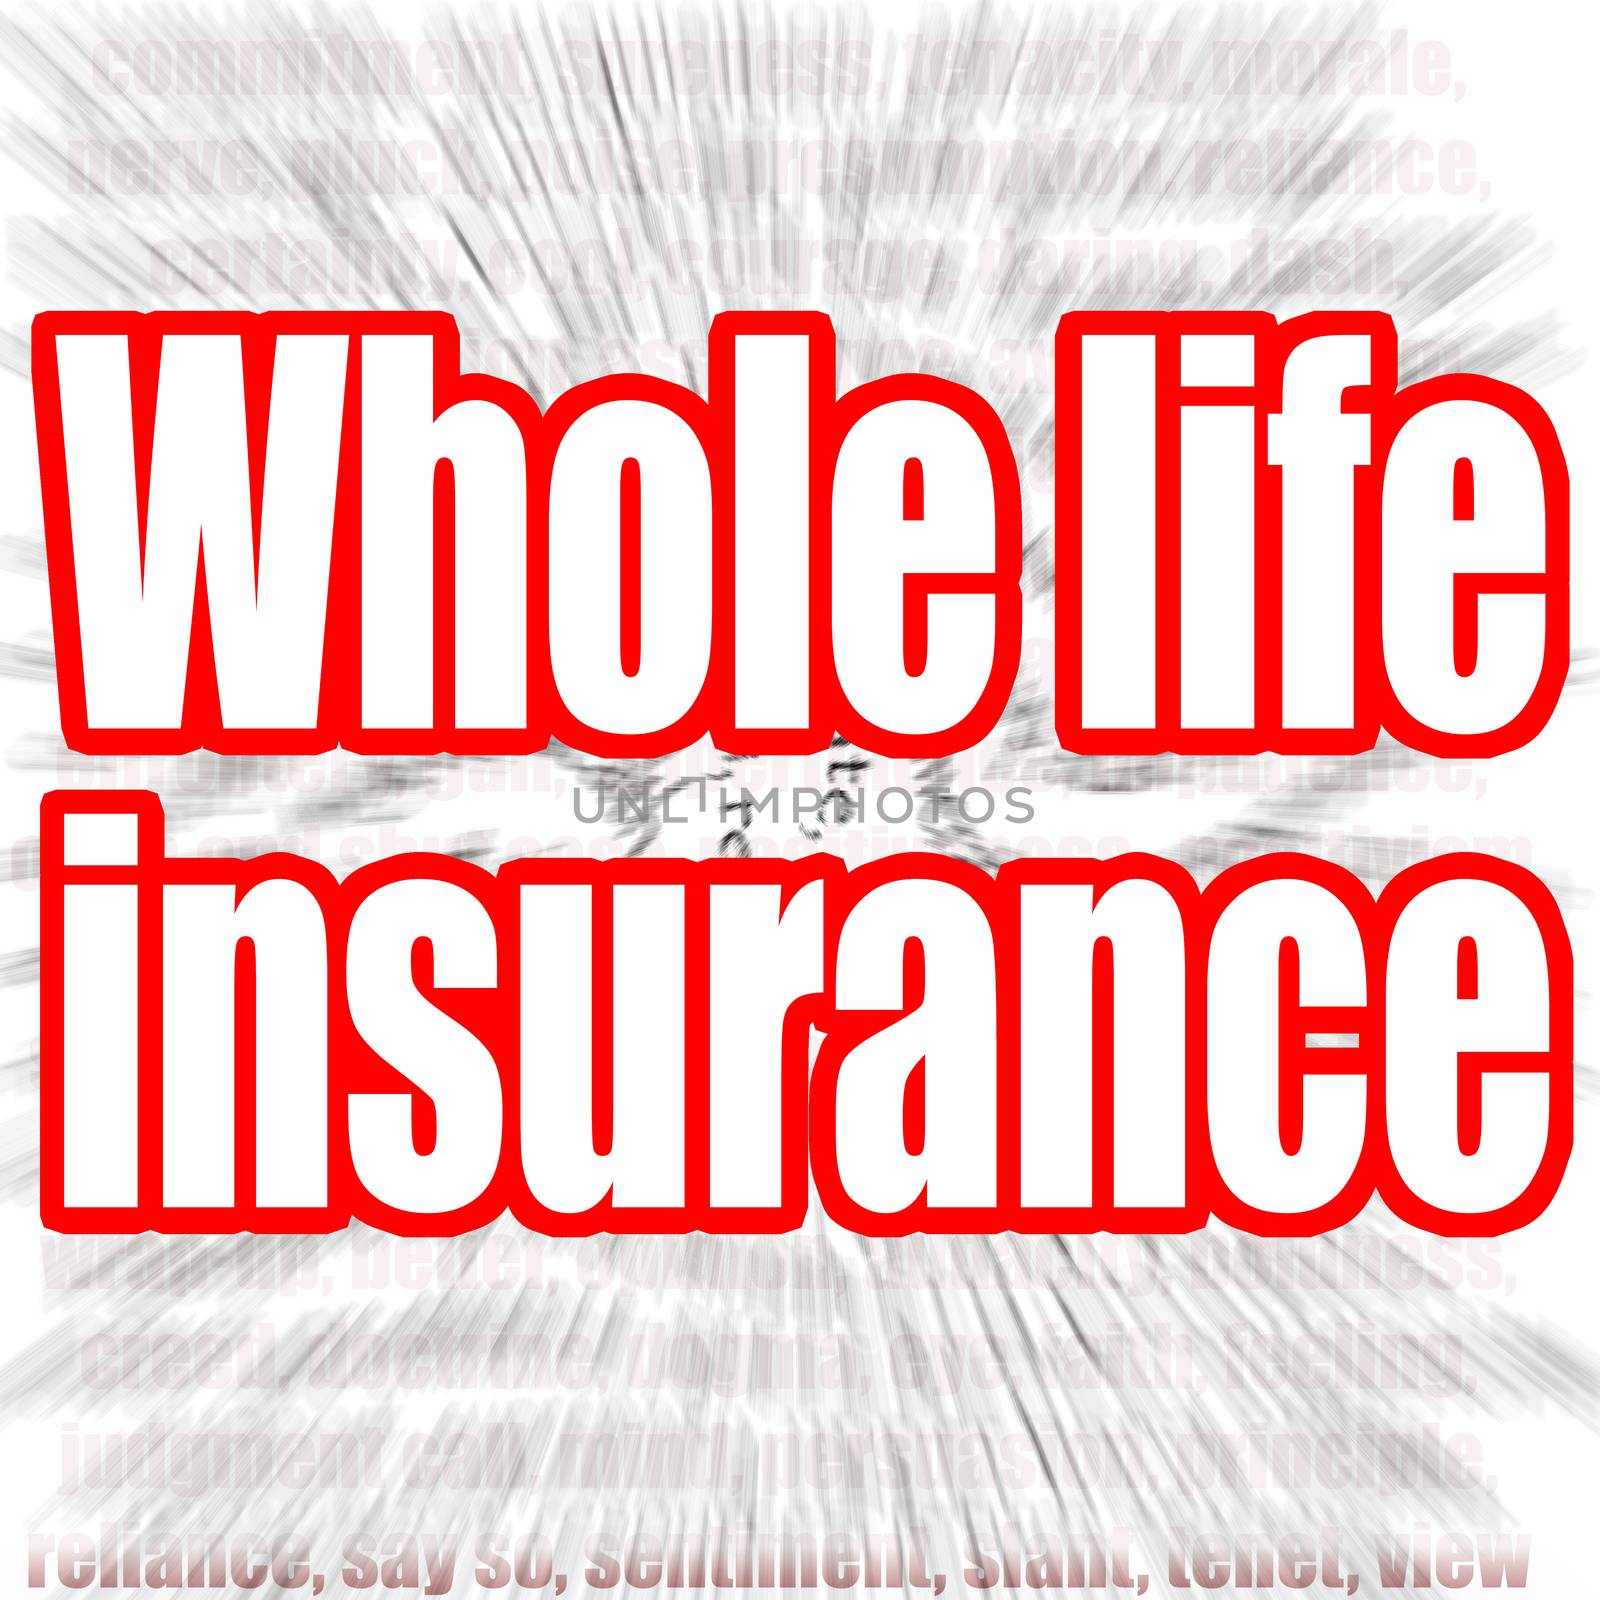 Whole life insurance word with zoom in effect as background, 3D rendering